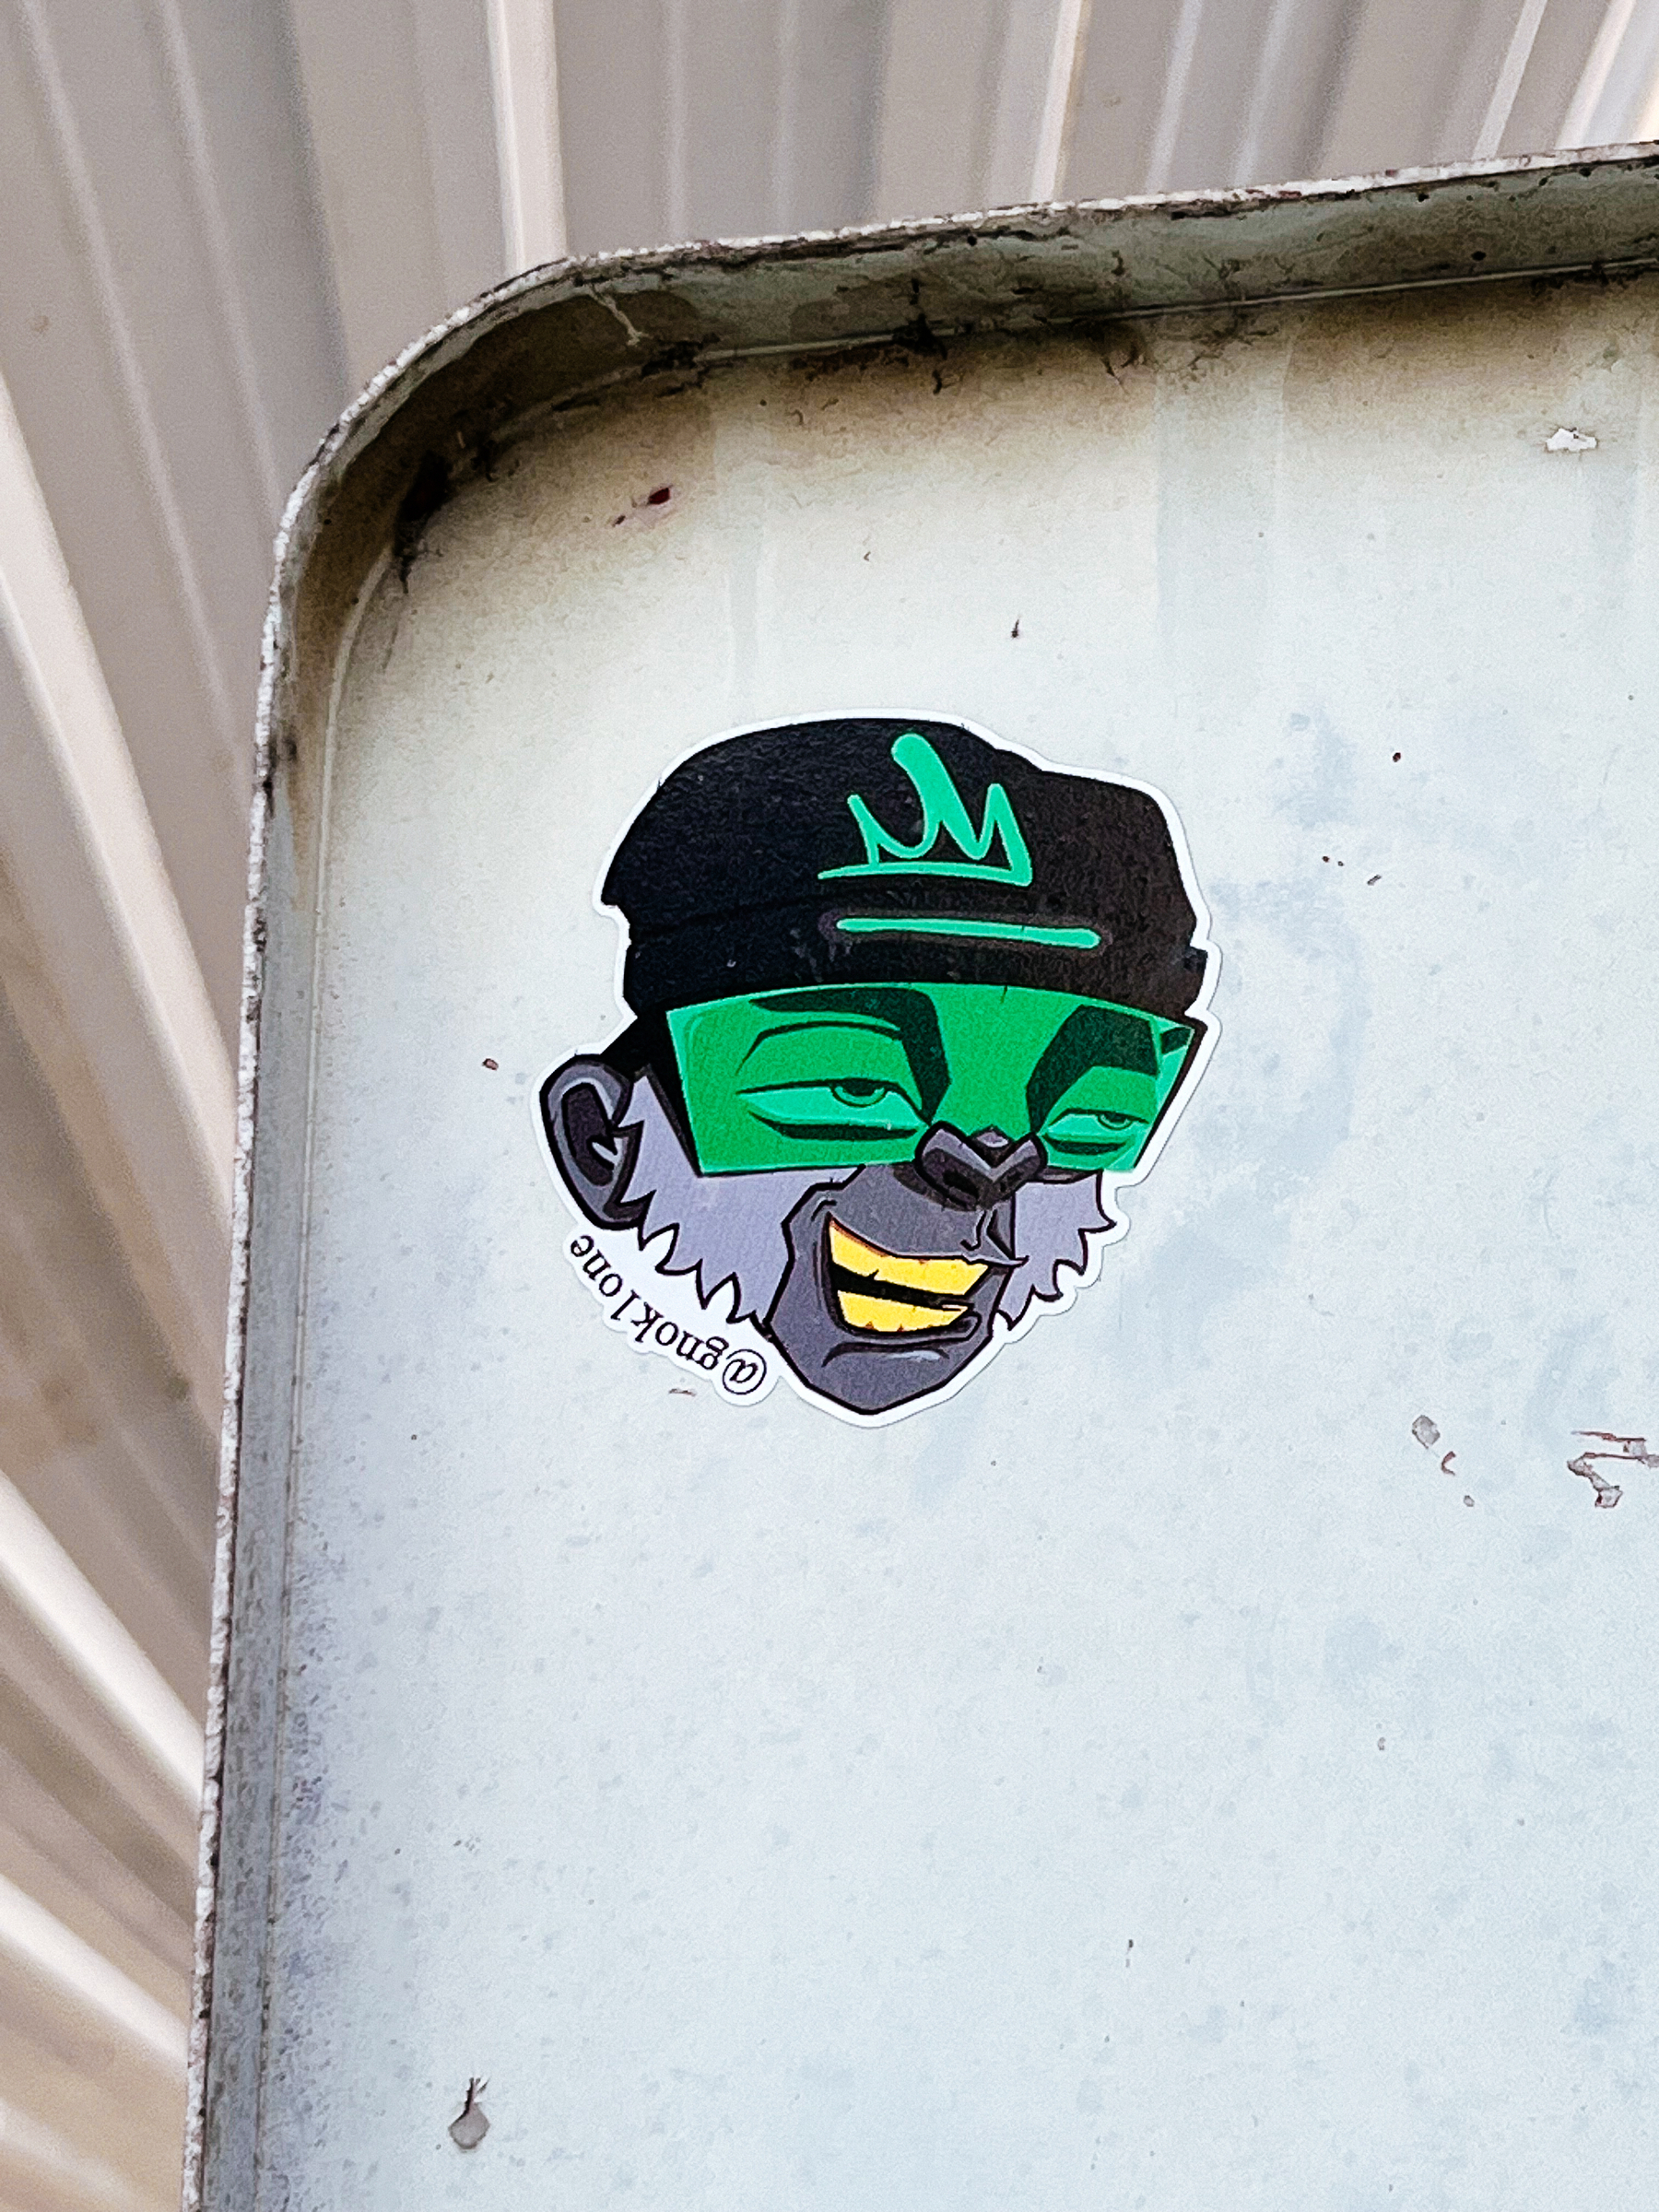 A monkey wearing a beret, and green shades. He looks like he smoked something, and he’s flying high. It’s a sticker, not a real monkey, of course. 